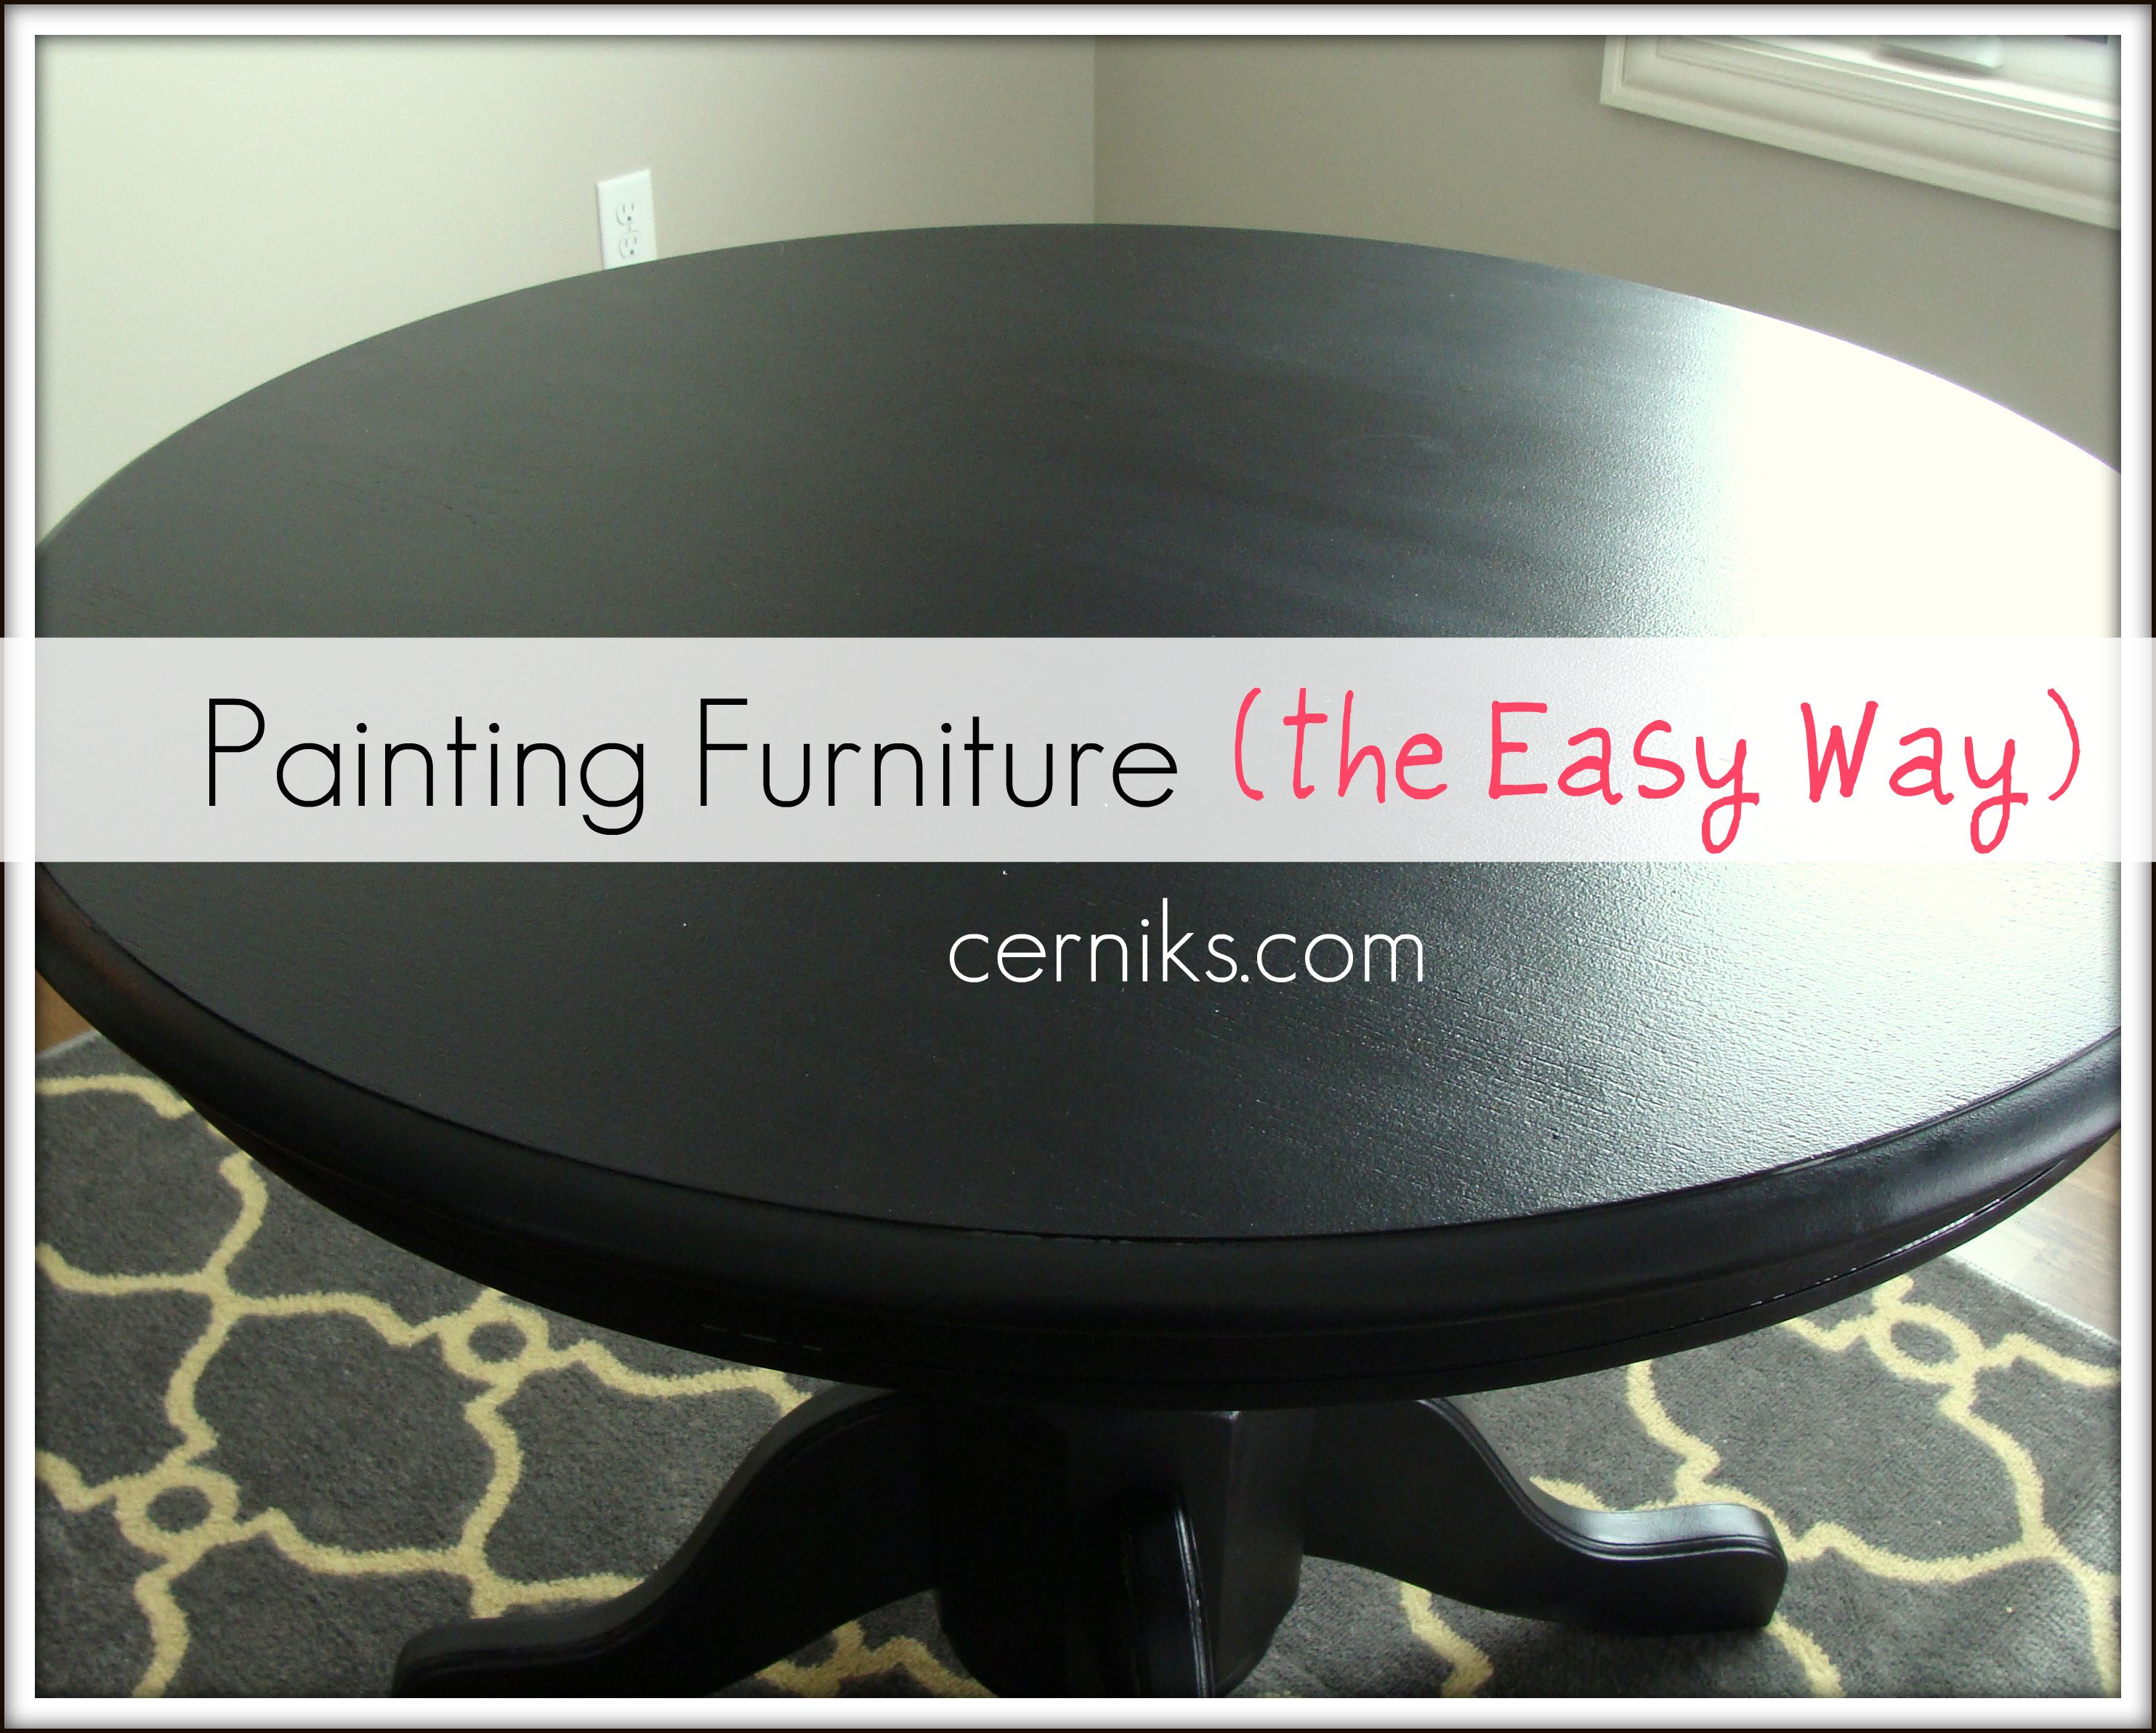 Furniture Painting Tutorial and Tips! « The Cerniks